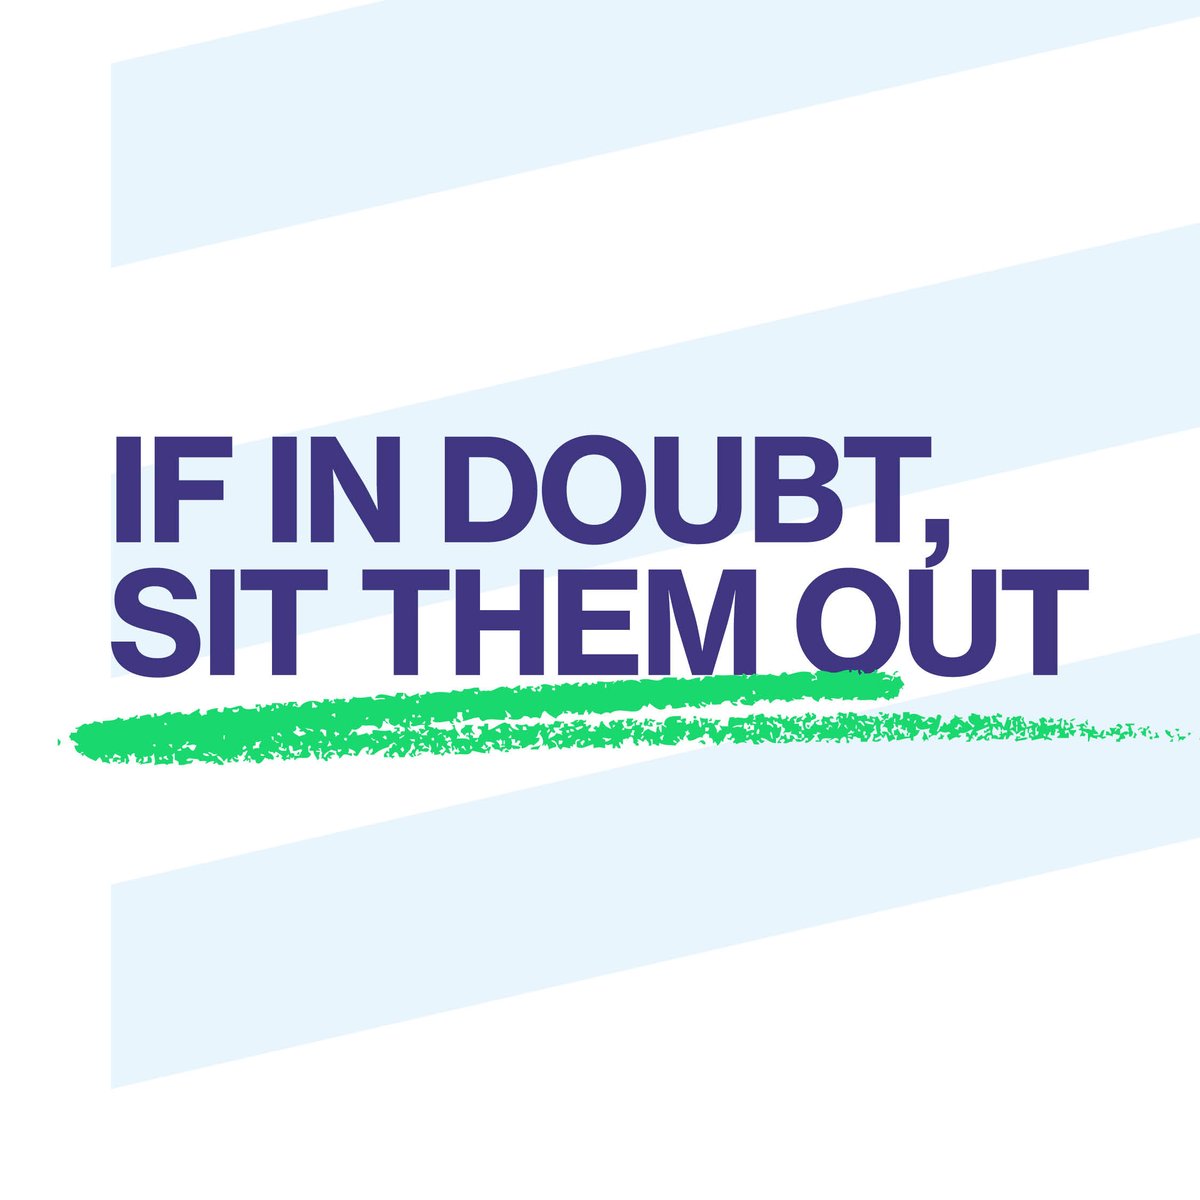 New UK-wide guidance for concussion in grassroots sport is released today building on the world-leading guidelines produced in Scotland. Concussion in sport is a serious issue. Find out more: bit.ly/3LeH9Ou #IfInDoubtSitThemOut